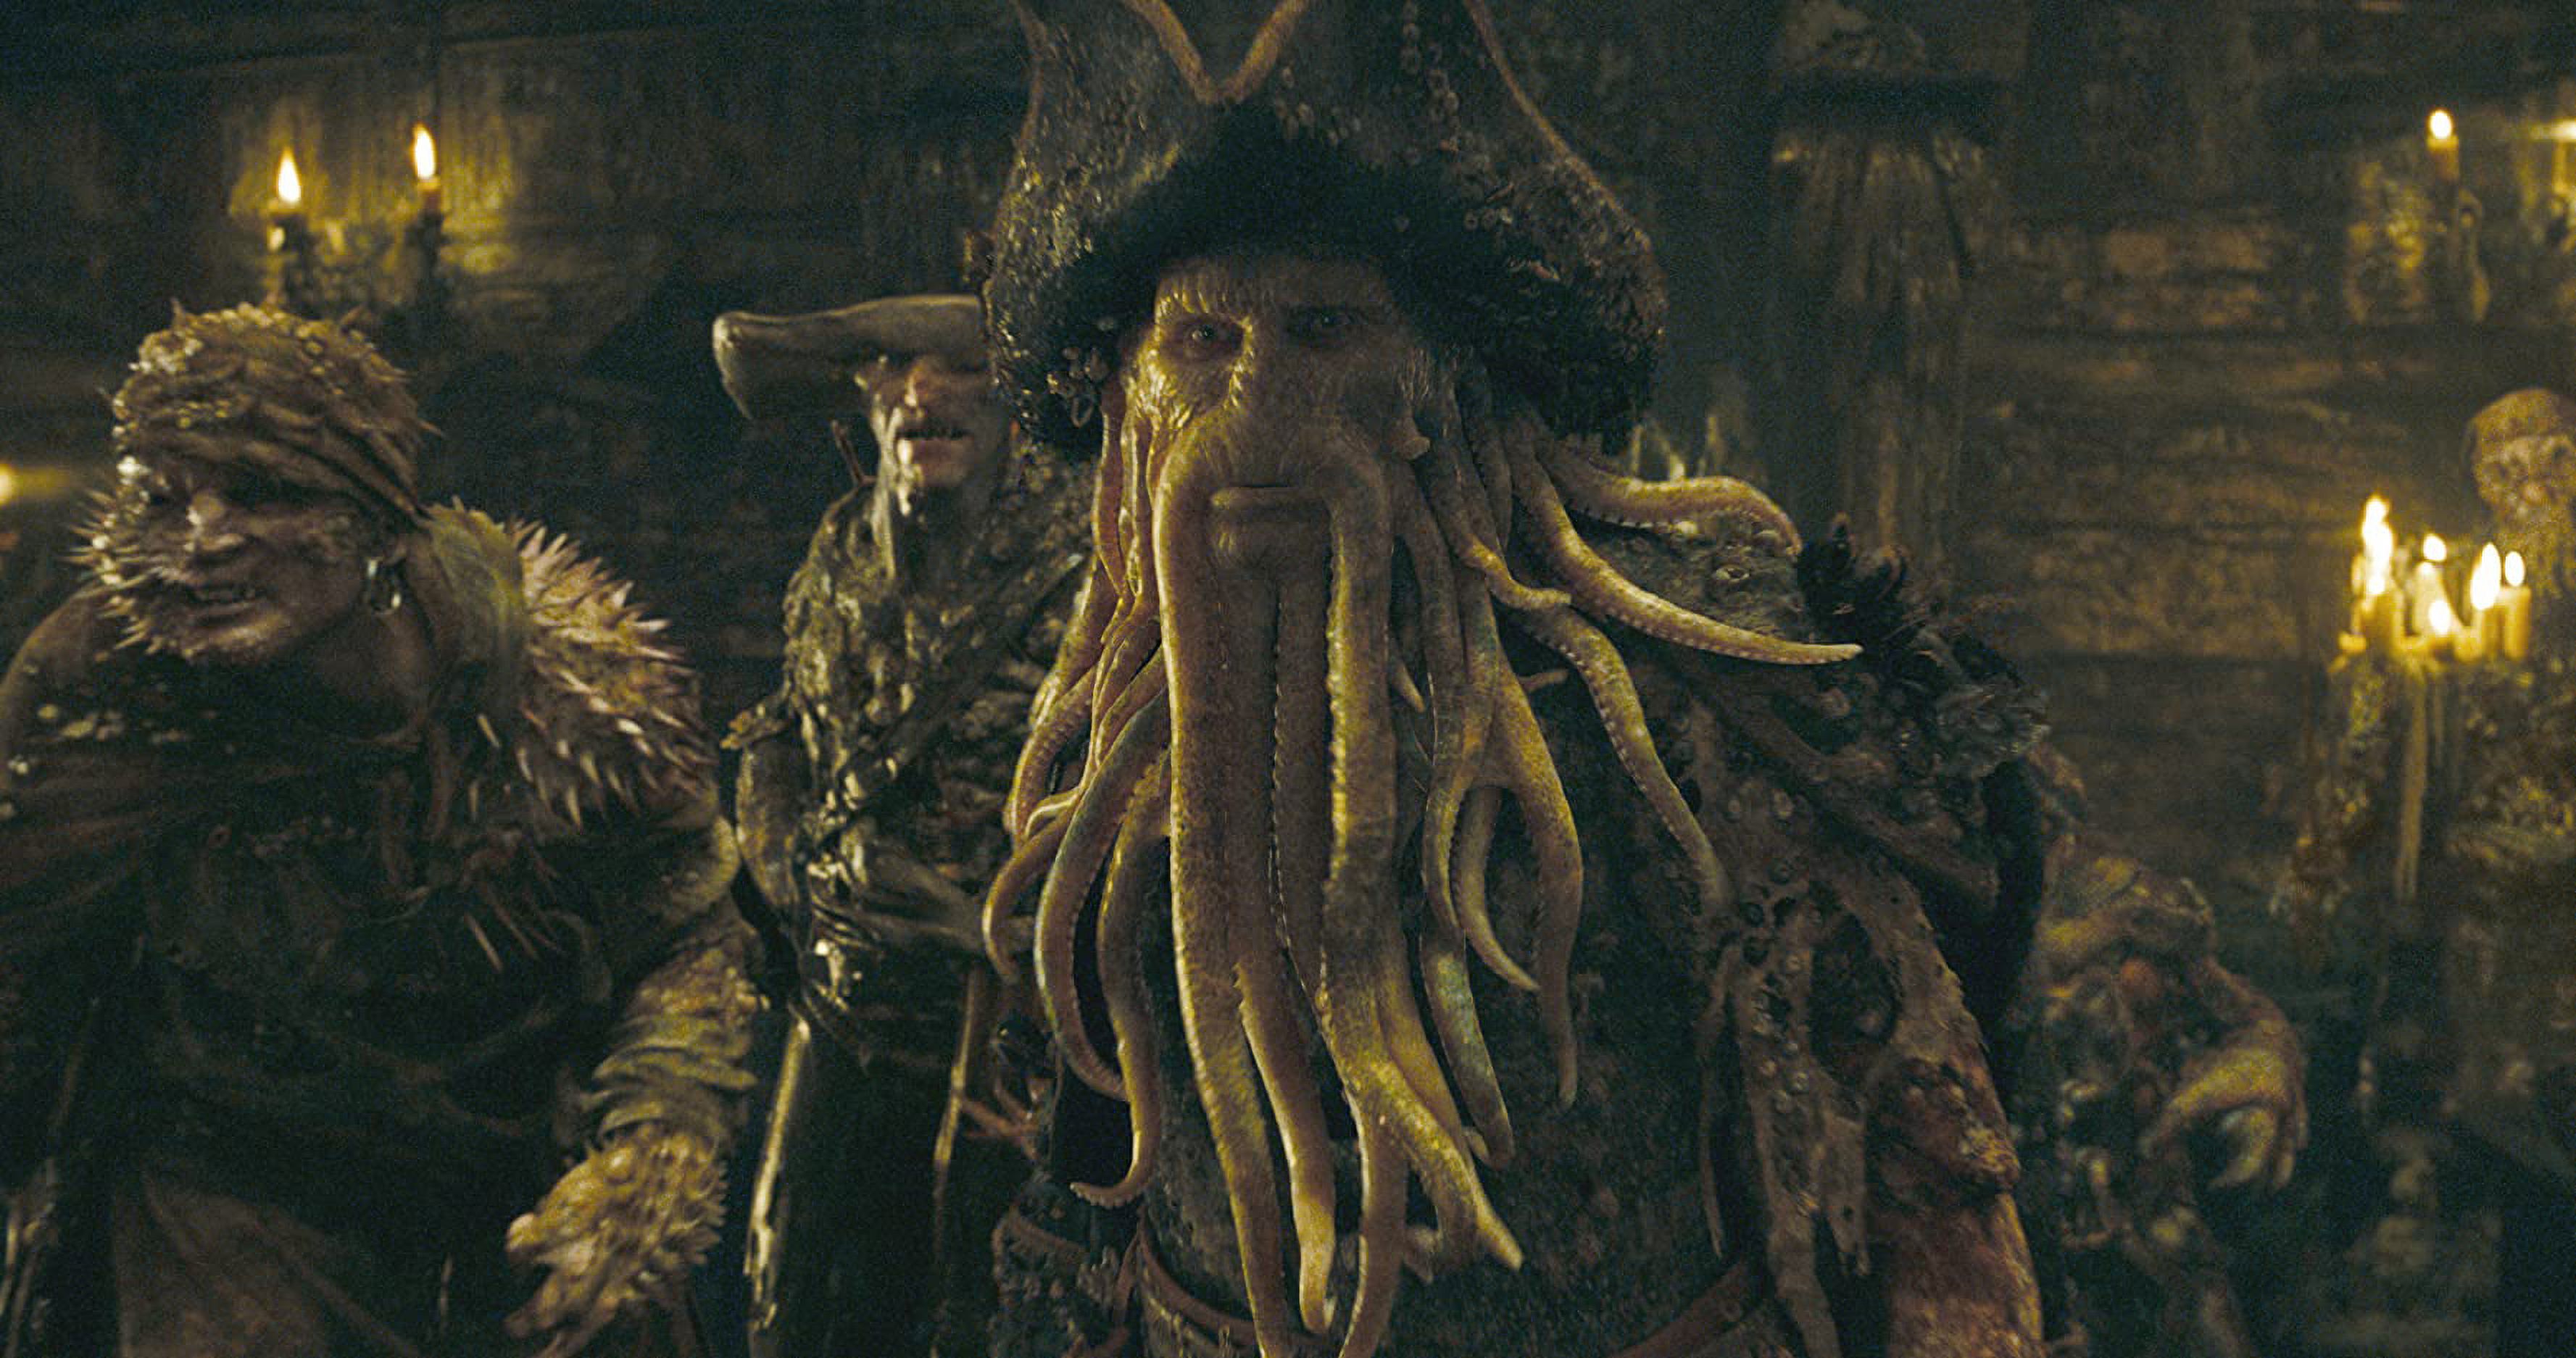 Pirates of the Caribbean - Complete Collection All 5 Movie Collection (Blu-ray) - image 3 of 11